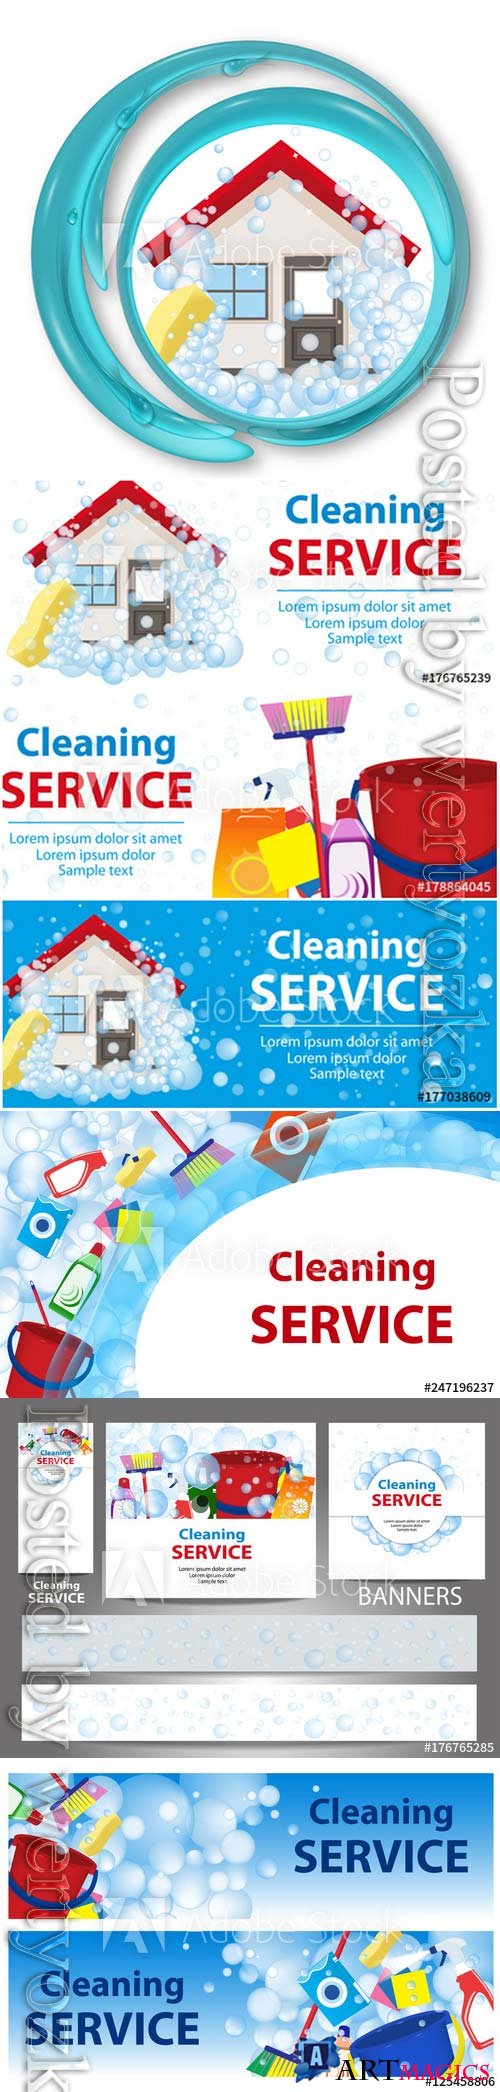 Poster template for house cleaning services vector design